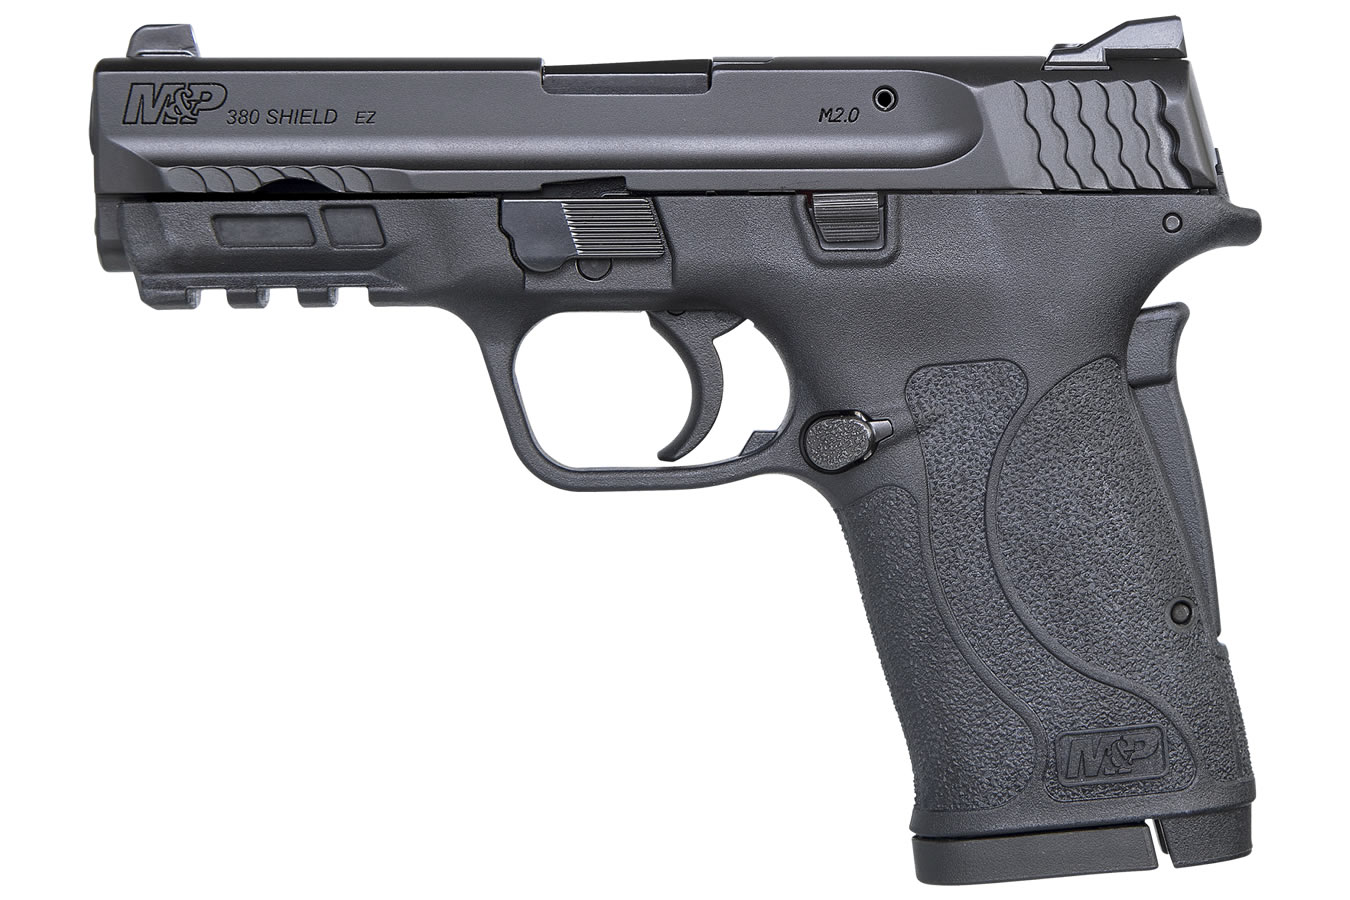 No. 10 Best Selling: SMITH AND WESSON MP380 SHIELD 380 ACP PISTOL W/ NO THUMB SAFETY